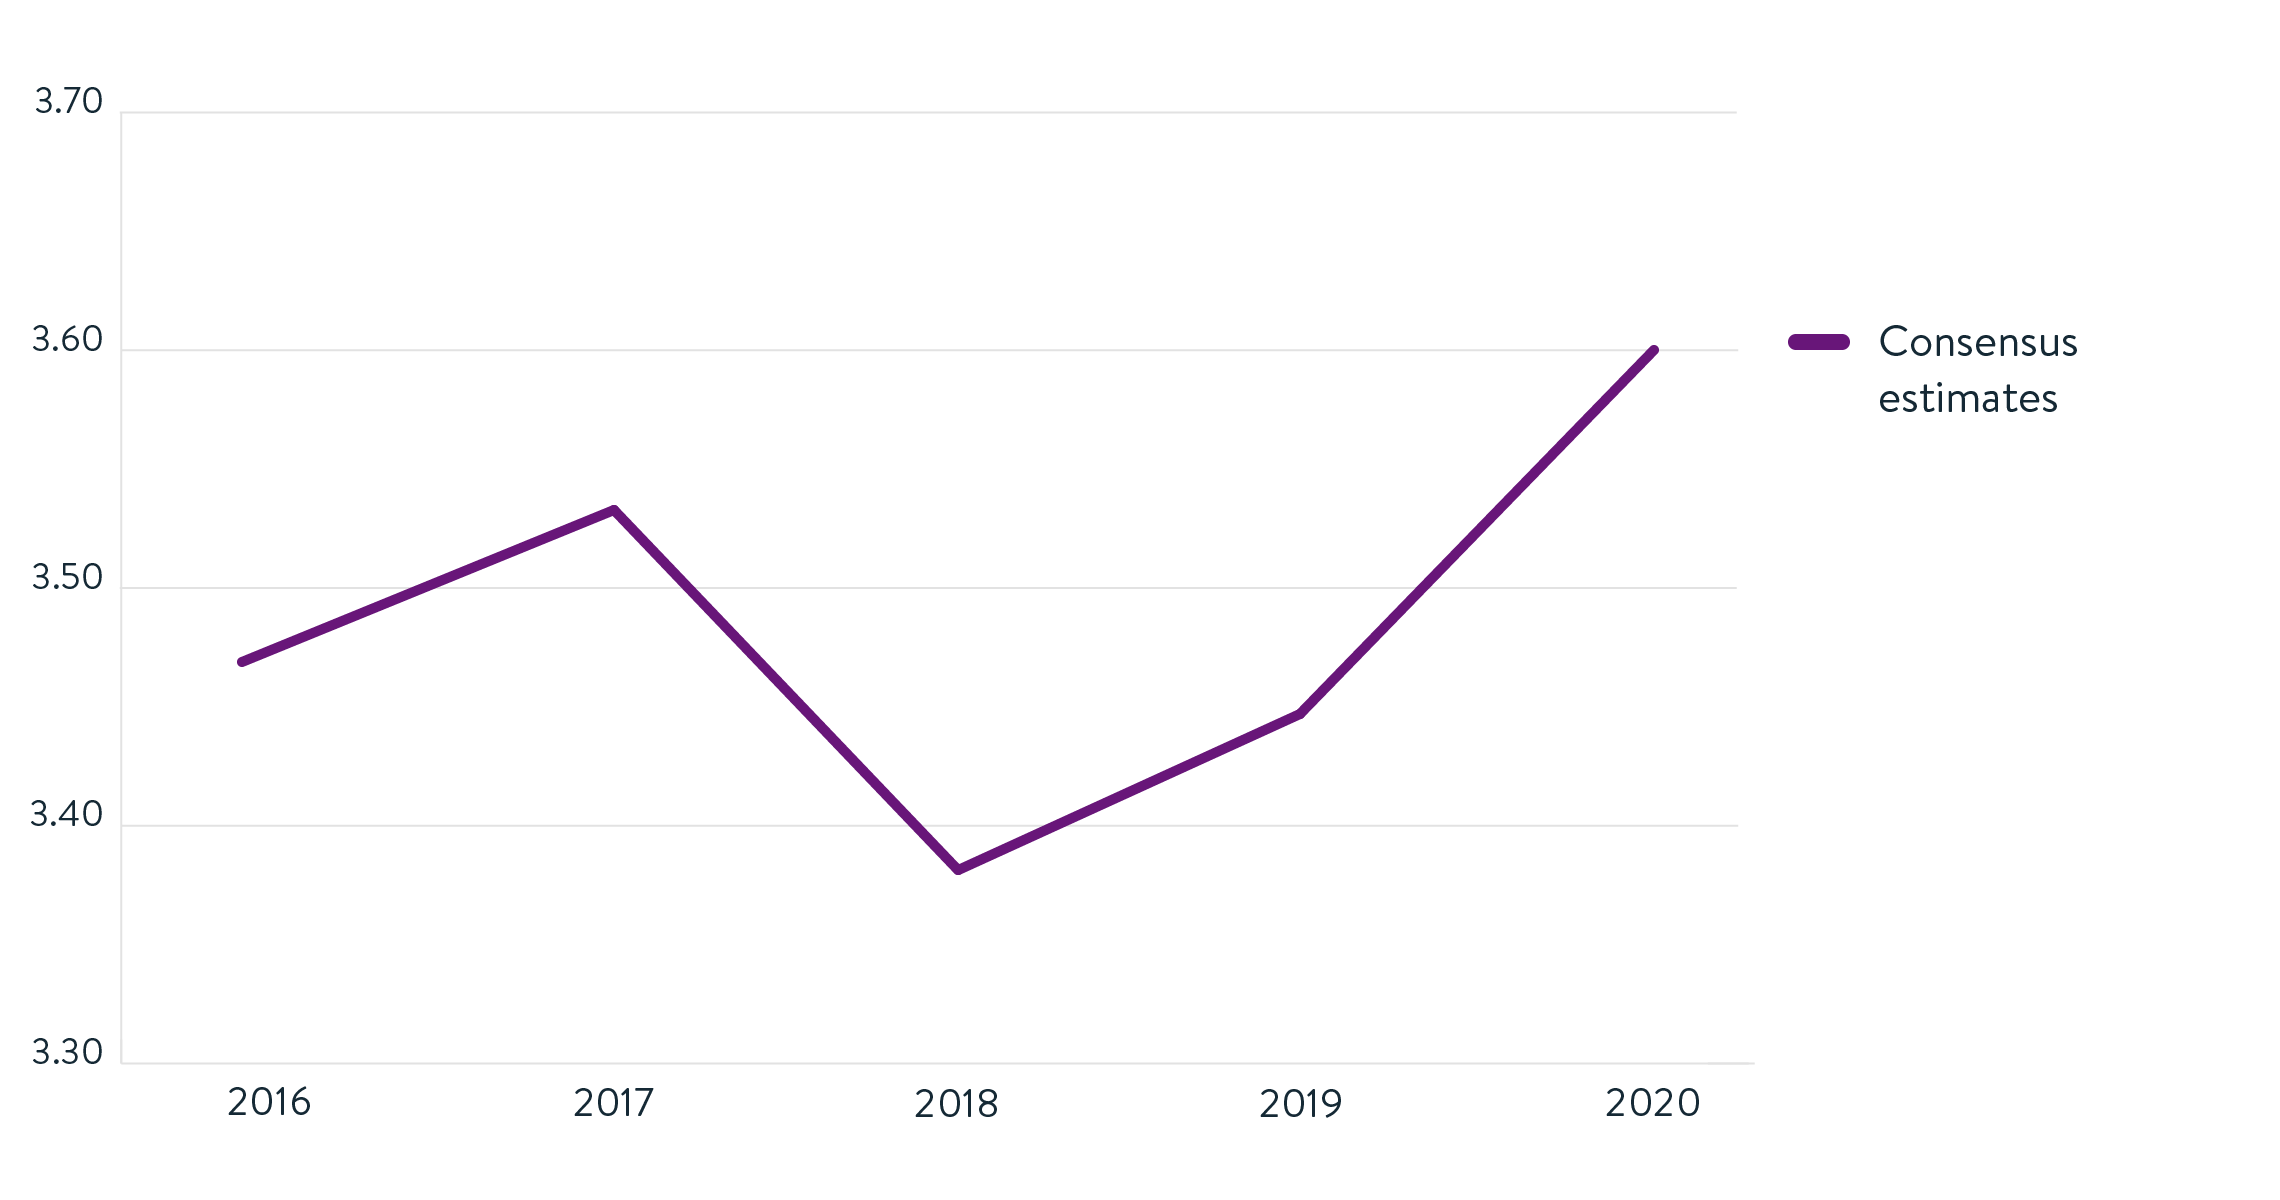 Line graph with the X axis showing years from 2016-2020 and the Y axis showing numbers from 3.30 to 3.70. The line starts around 3.48 and rises and falls over the next 3 years, before in 2020 clearly increasing up above 3.60. 